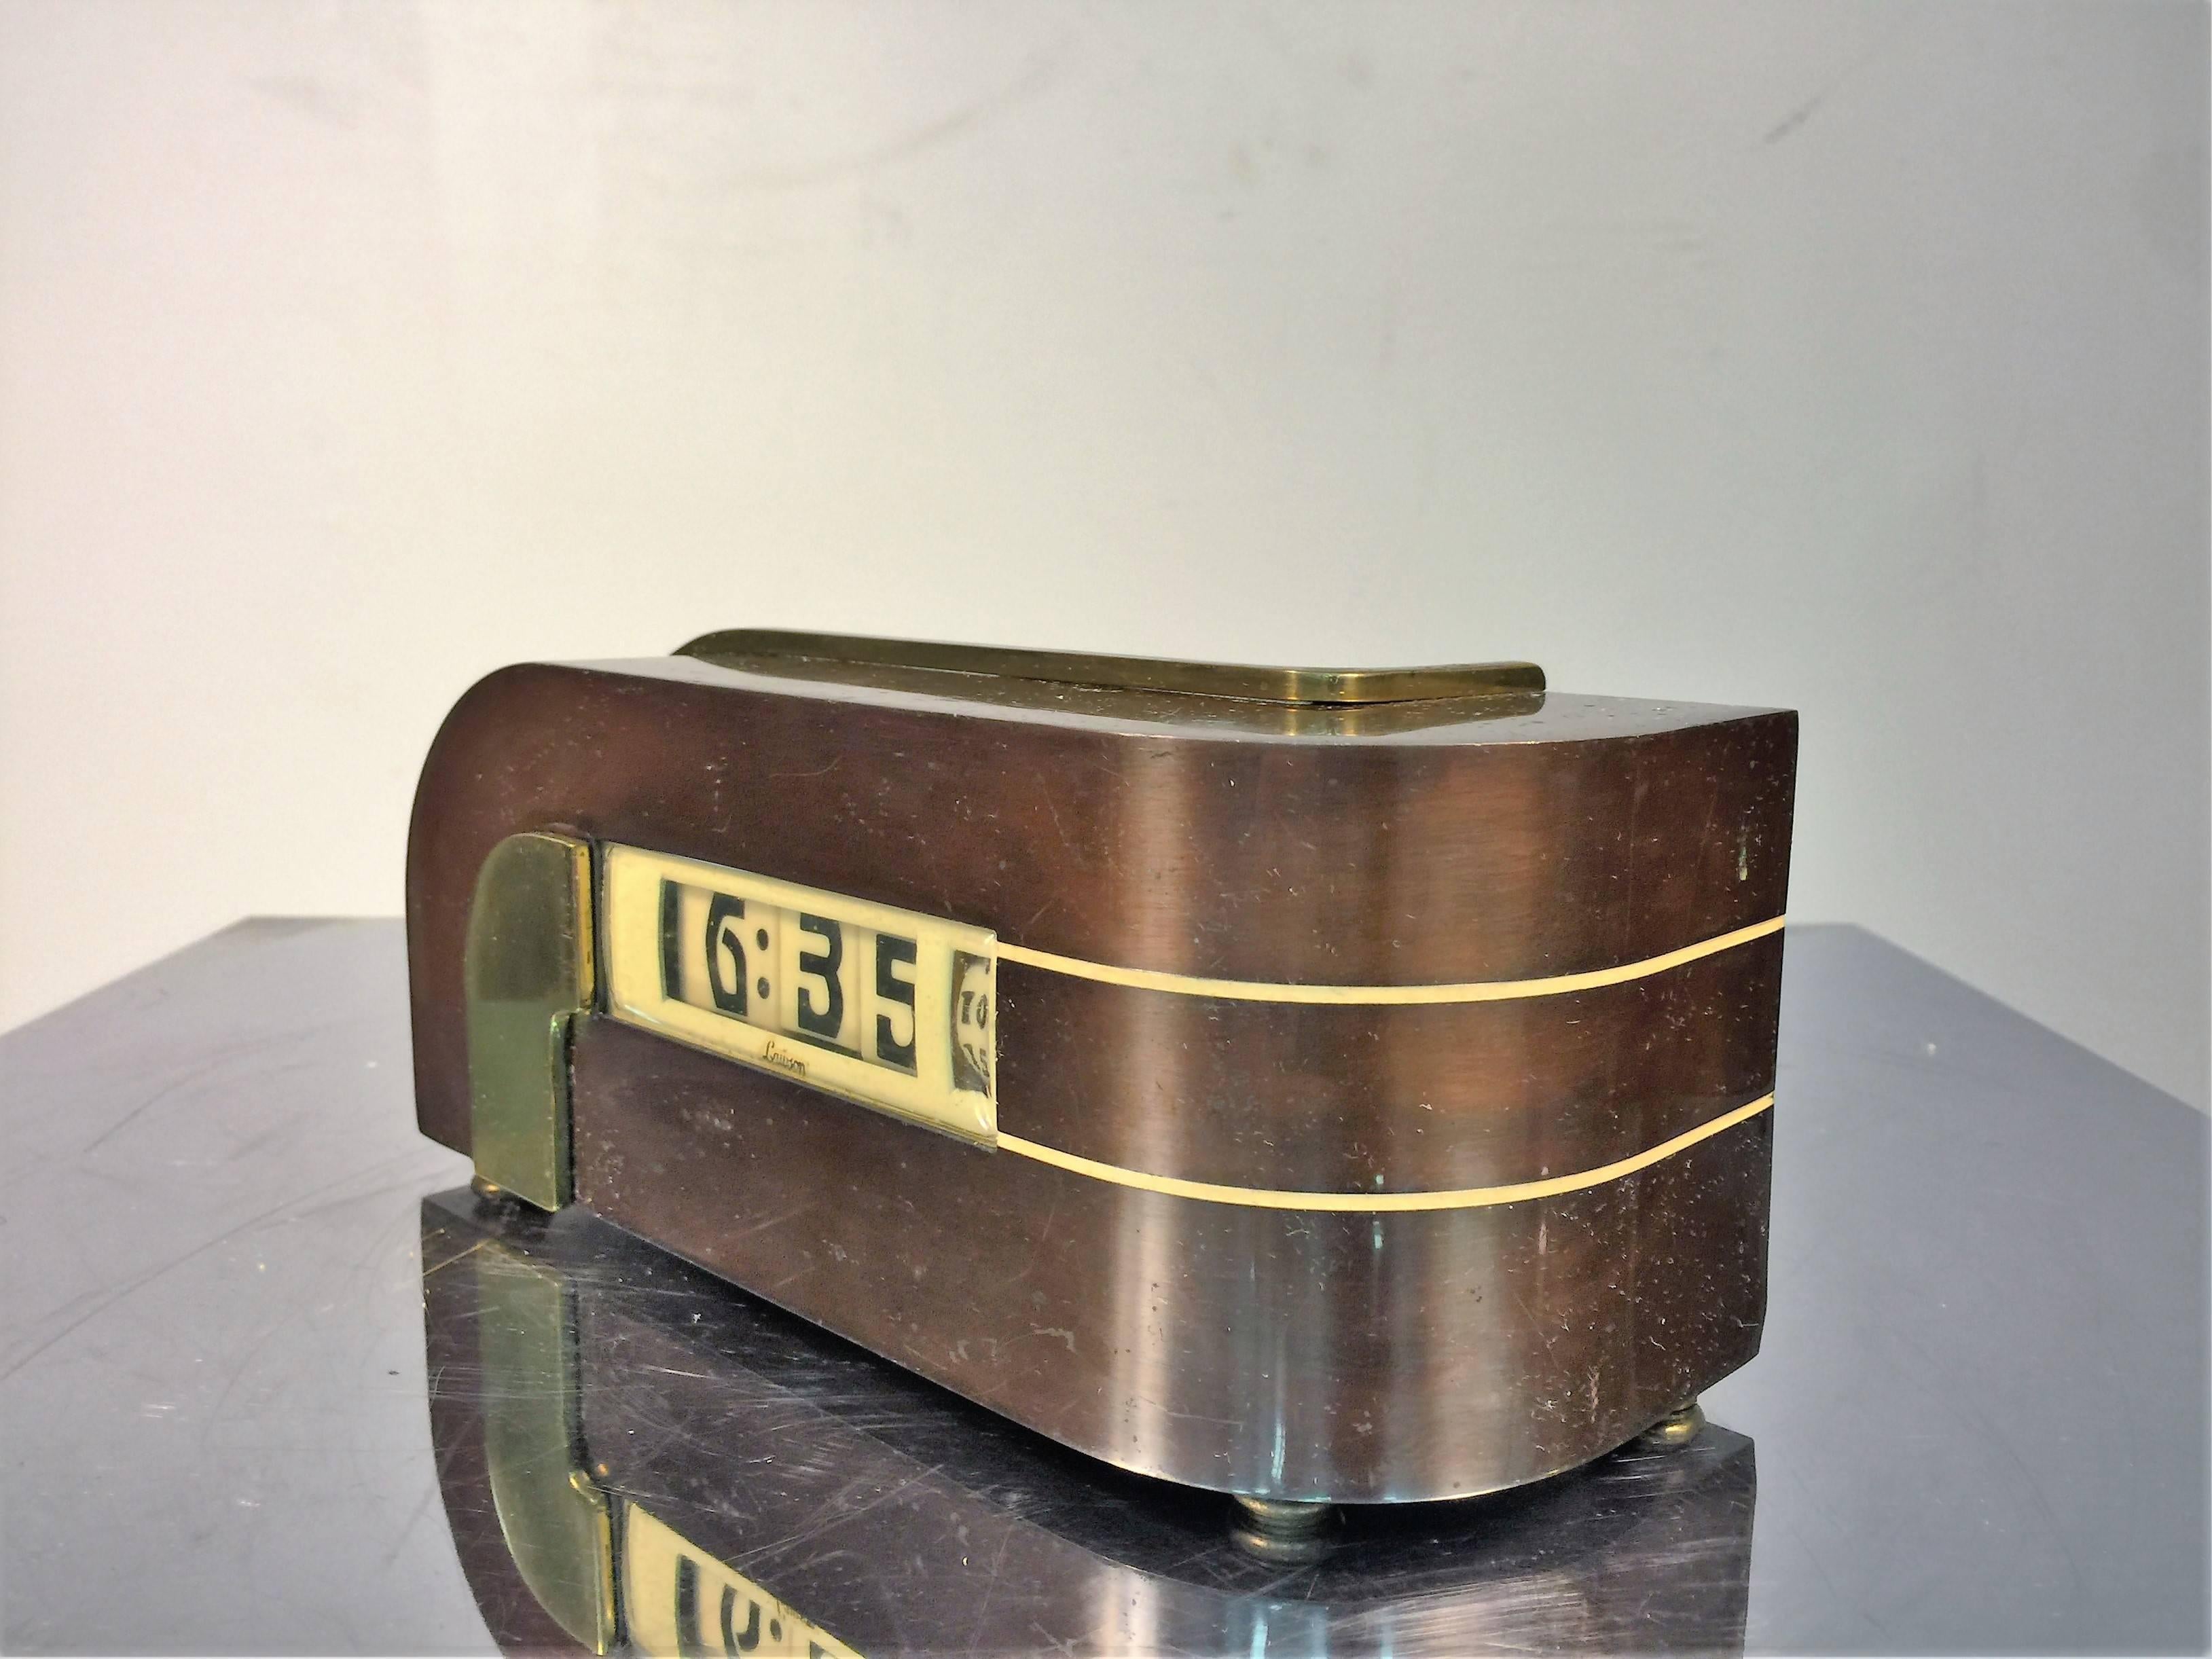 Great design burnished bronze and brass with ivory enameled trim fantastic Machine Age design electric clock designed in the 1930s. Great Art Deco stylized numbers in a digital form with the seconds wheel. Made by Lawson this clock runs beautifully